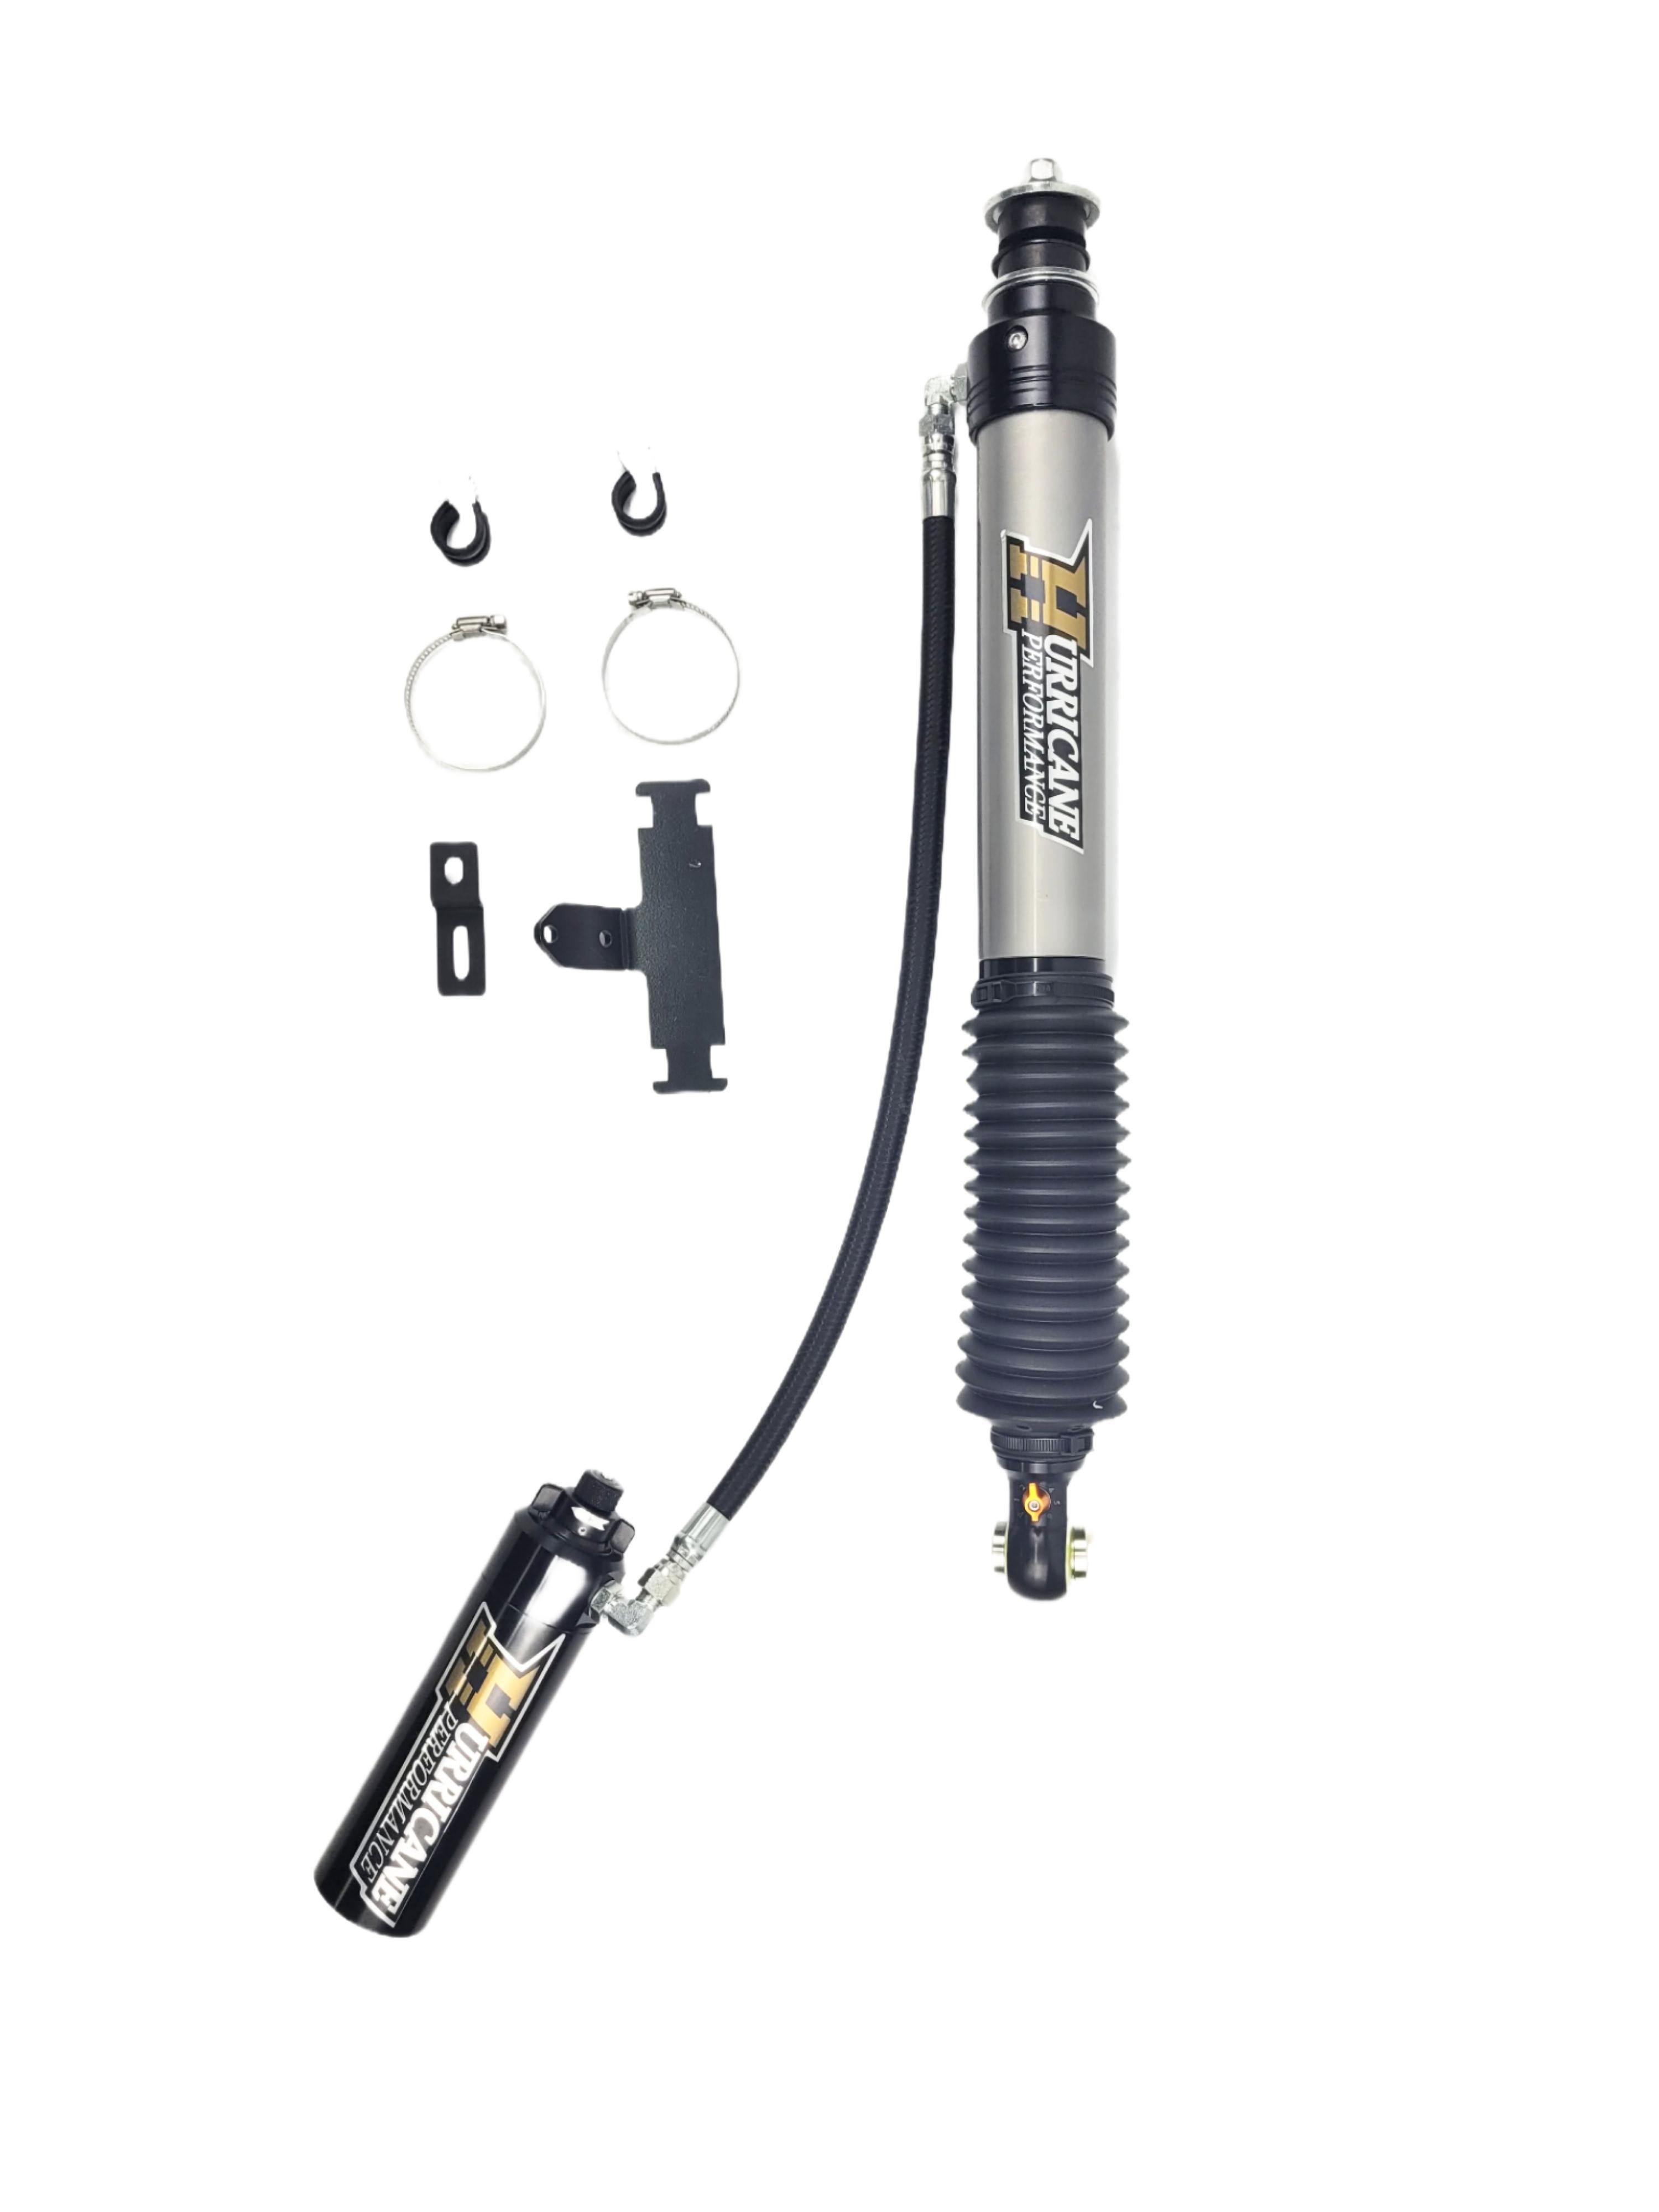 HURRICANE PERFORMANCE EXTREME SERIES 2.5 FRONT COIL-OVER WITH REMOTE RESERVIOR & 2.5 MONOTUBE REAR SHOCKS WITH 3 -WAY DAMPING ADJUSTMENT FOR LAND CRUISER 200 SERIES